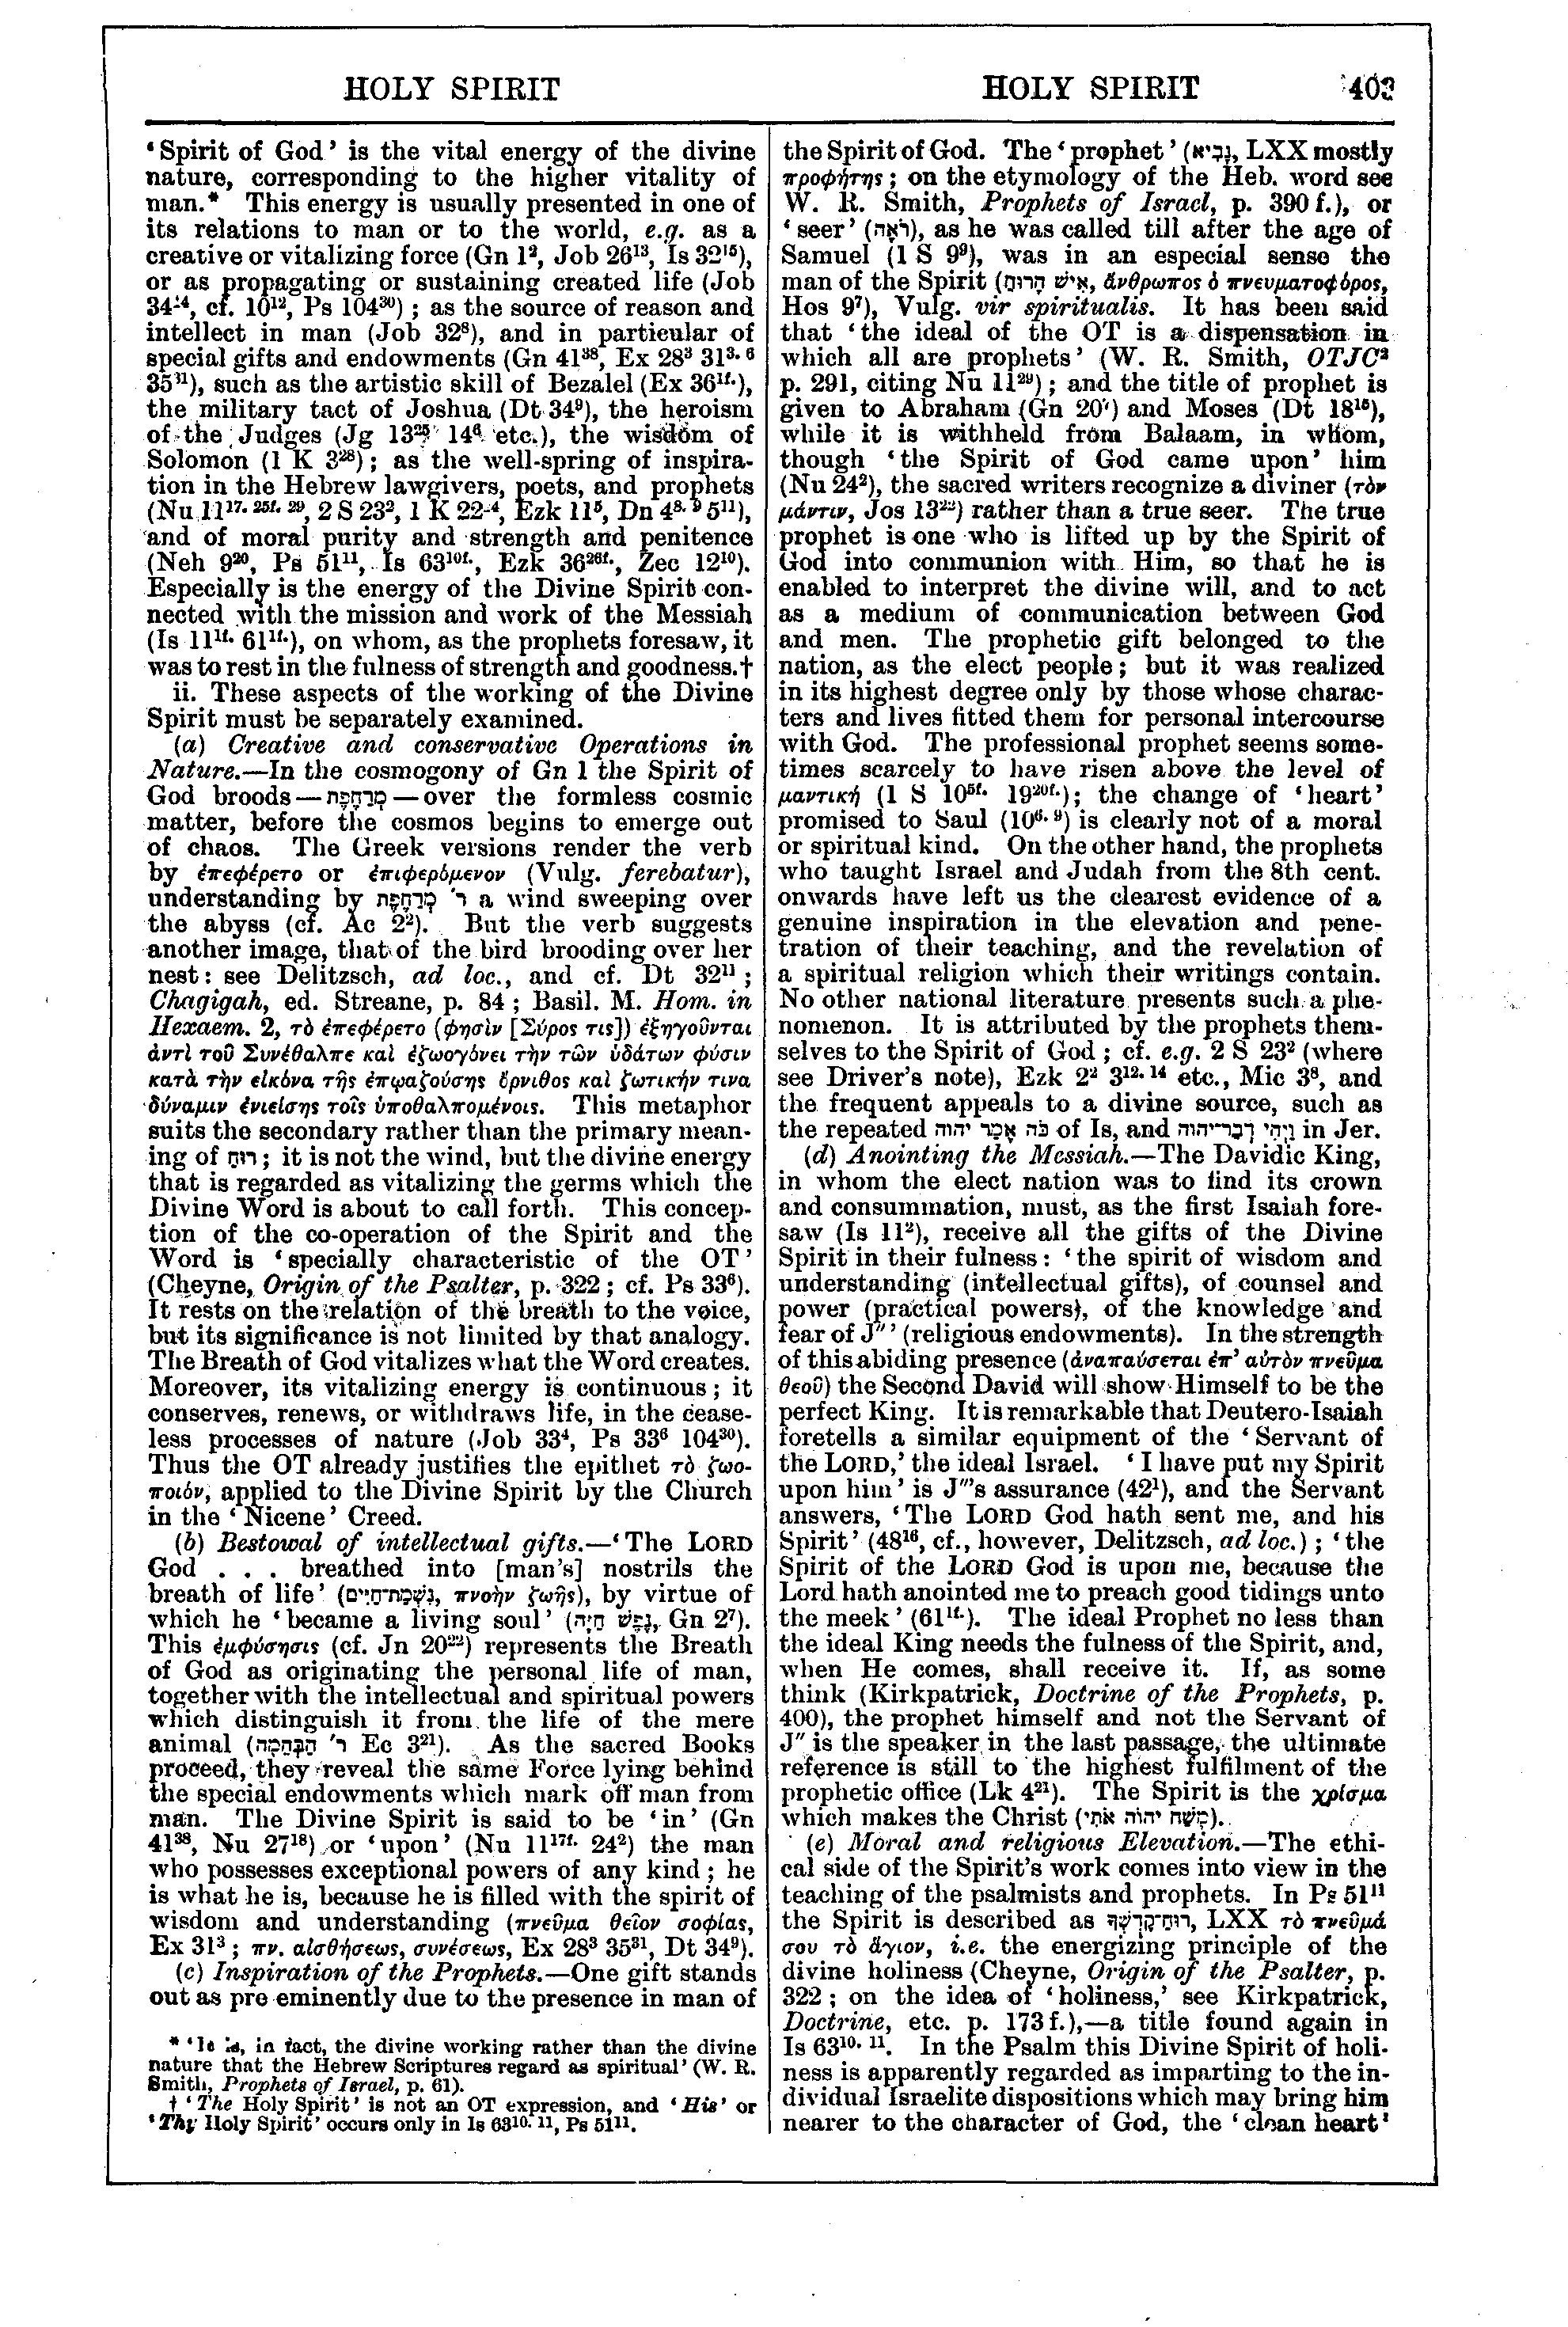 Image of page 403